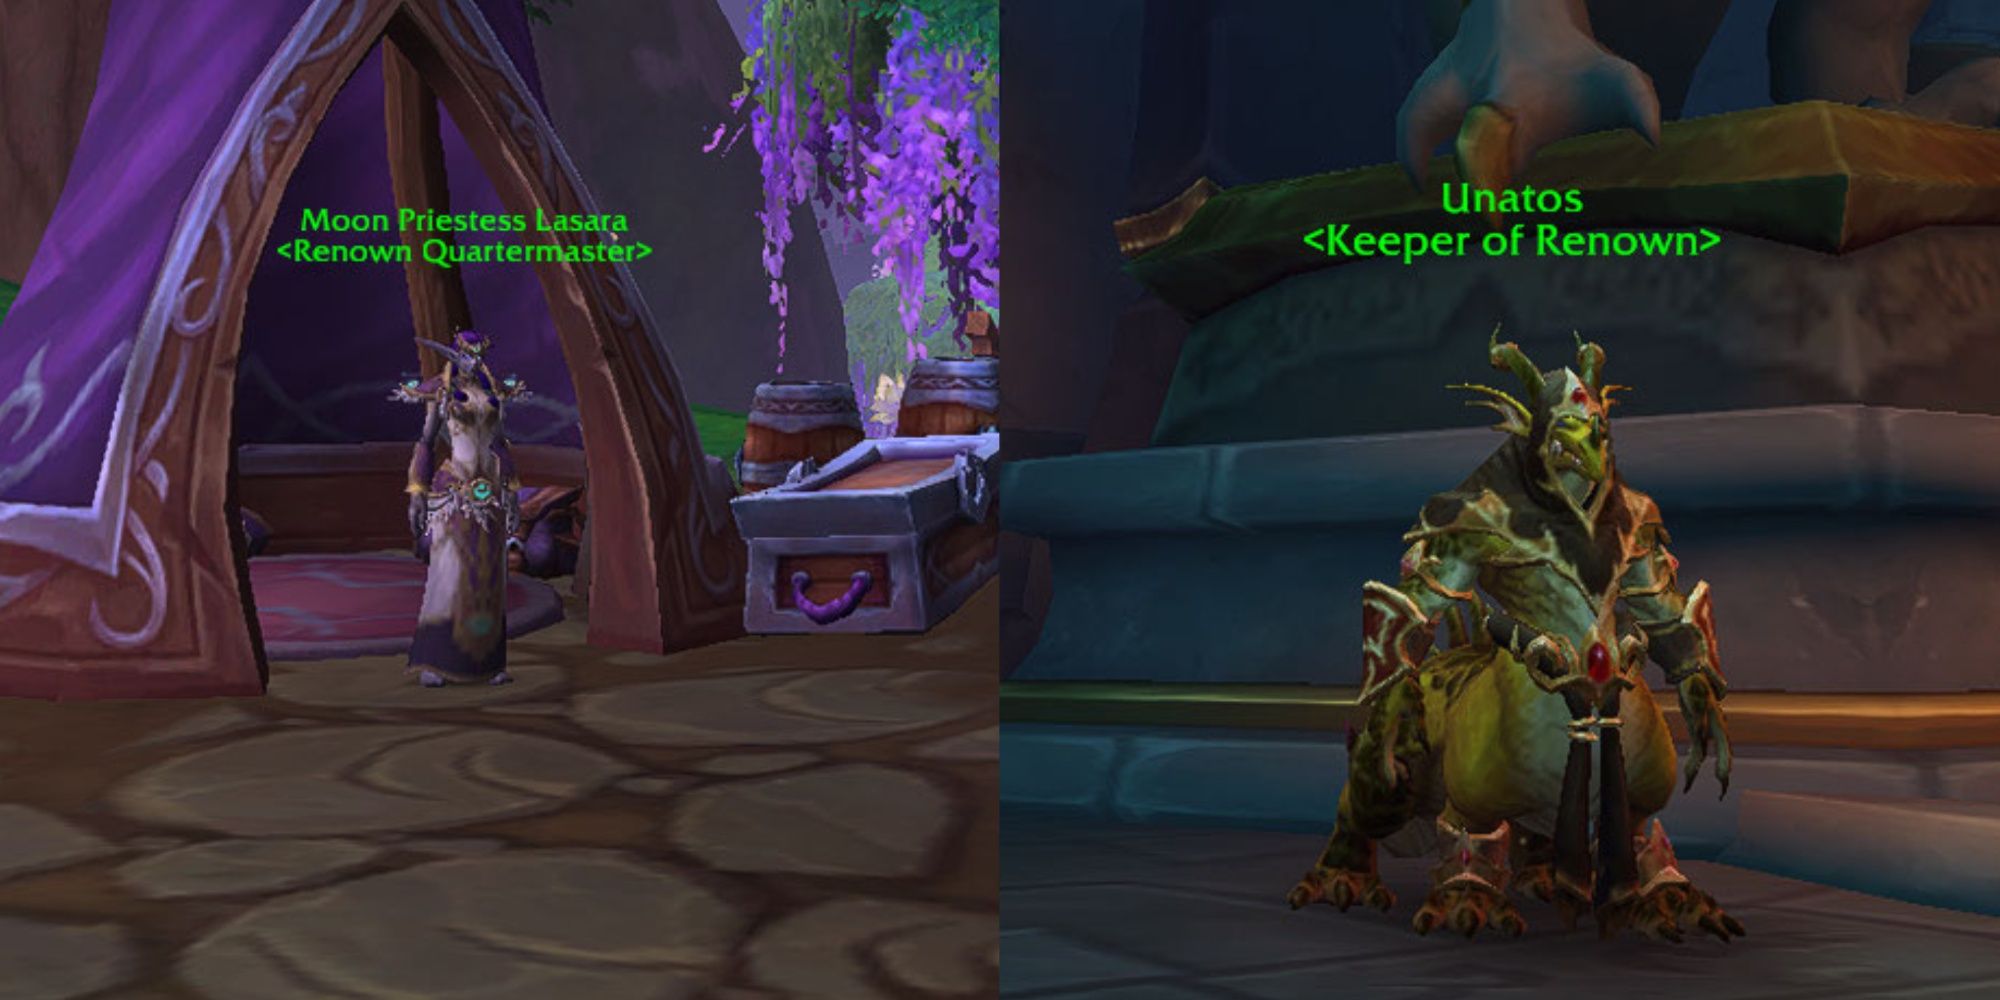 A Night elf and Drakonid Quartermaster in World of Warcraft